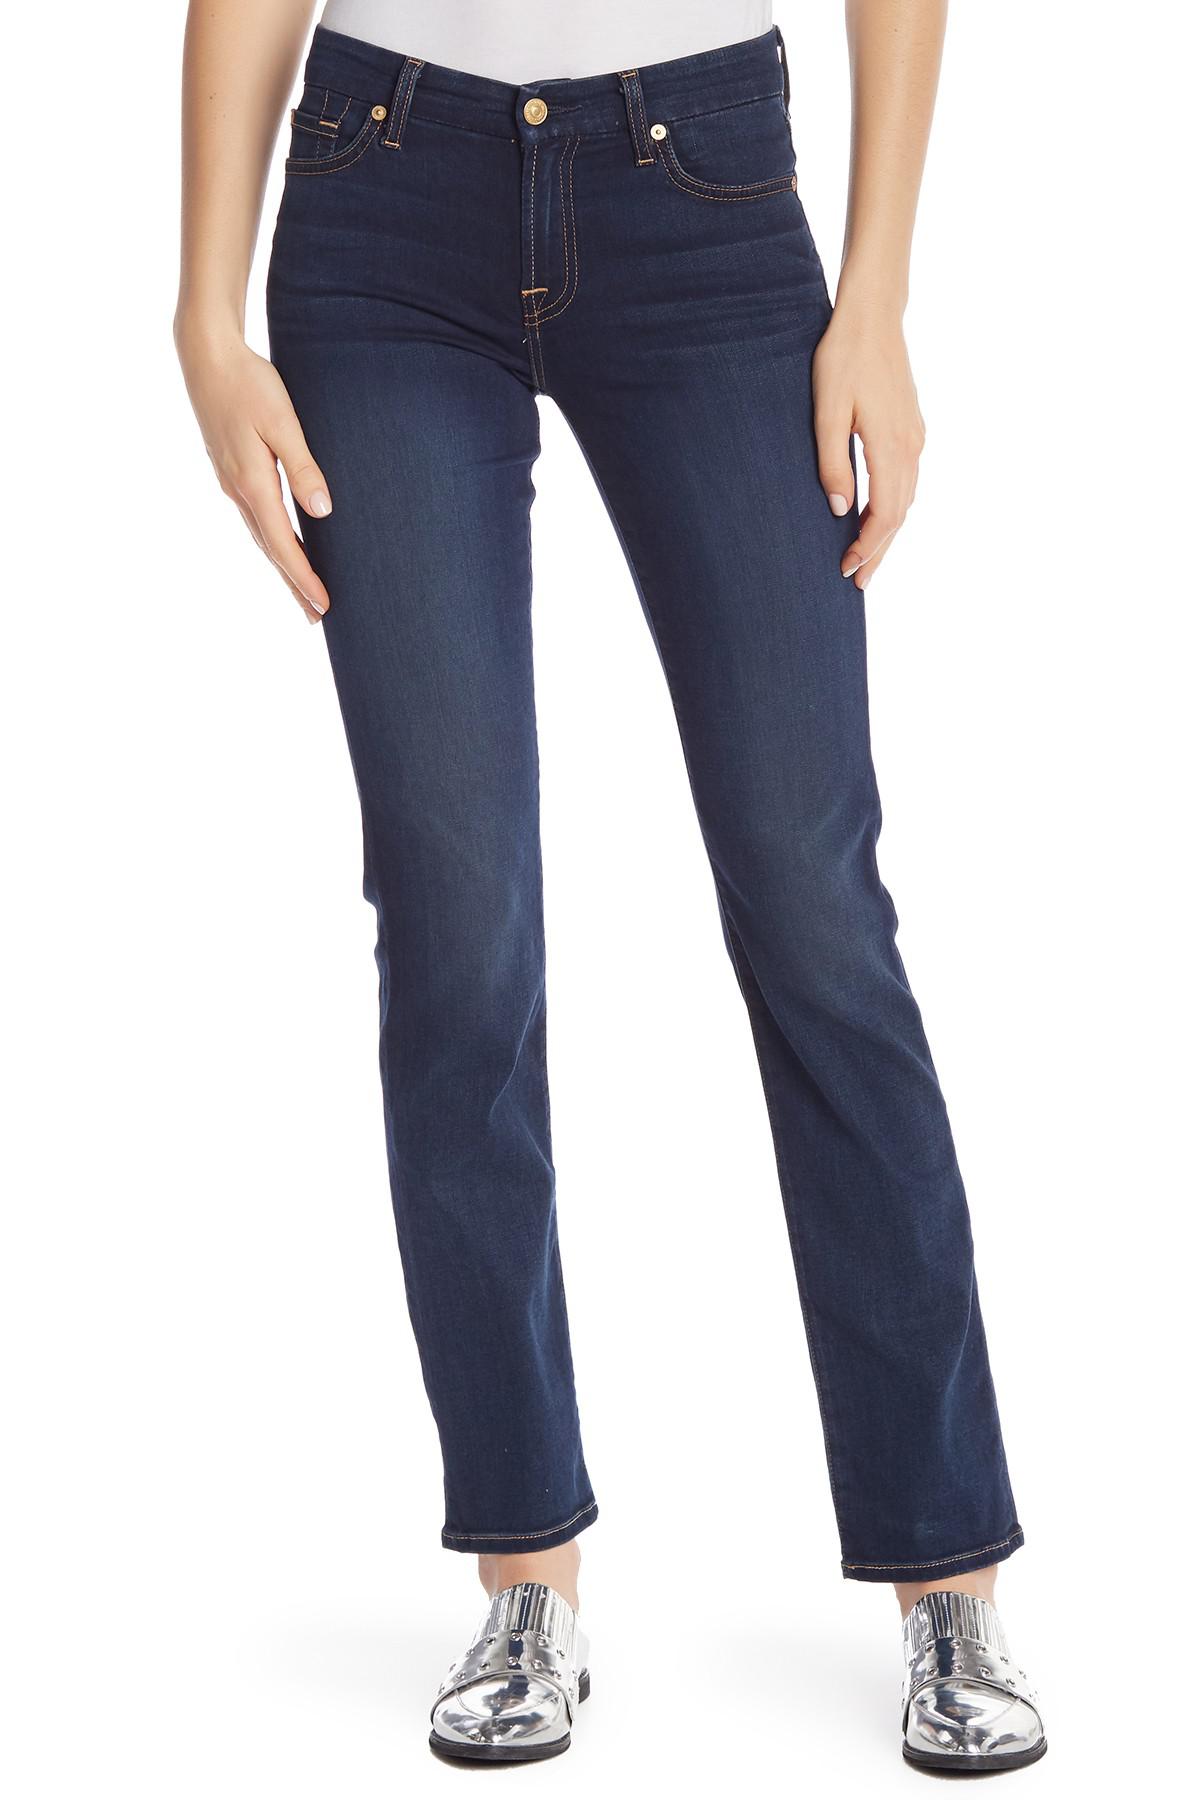 Lyst - 7 For All Mankind Kimmie Straight Leg Jeans in Blue